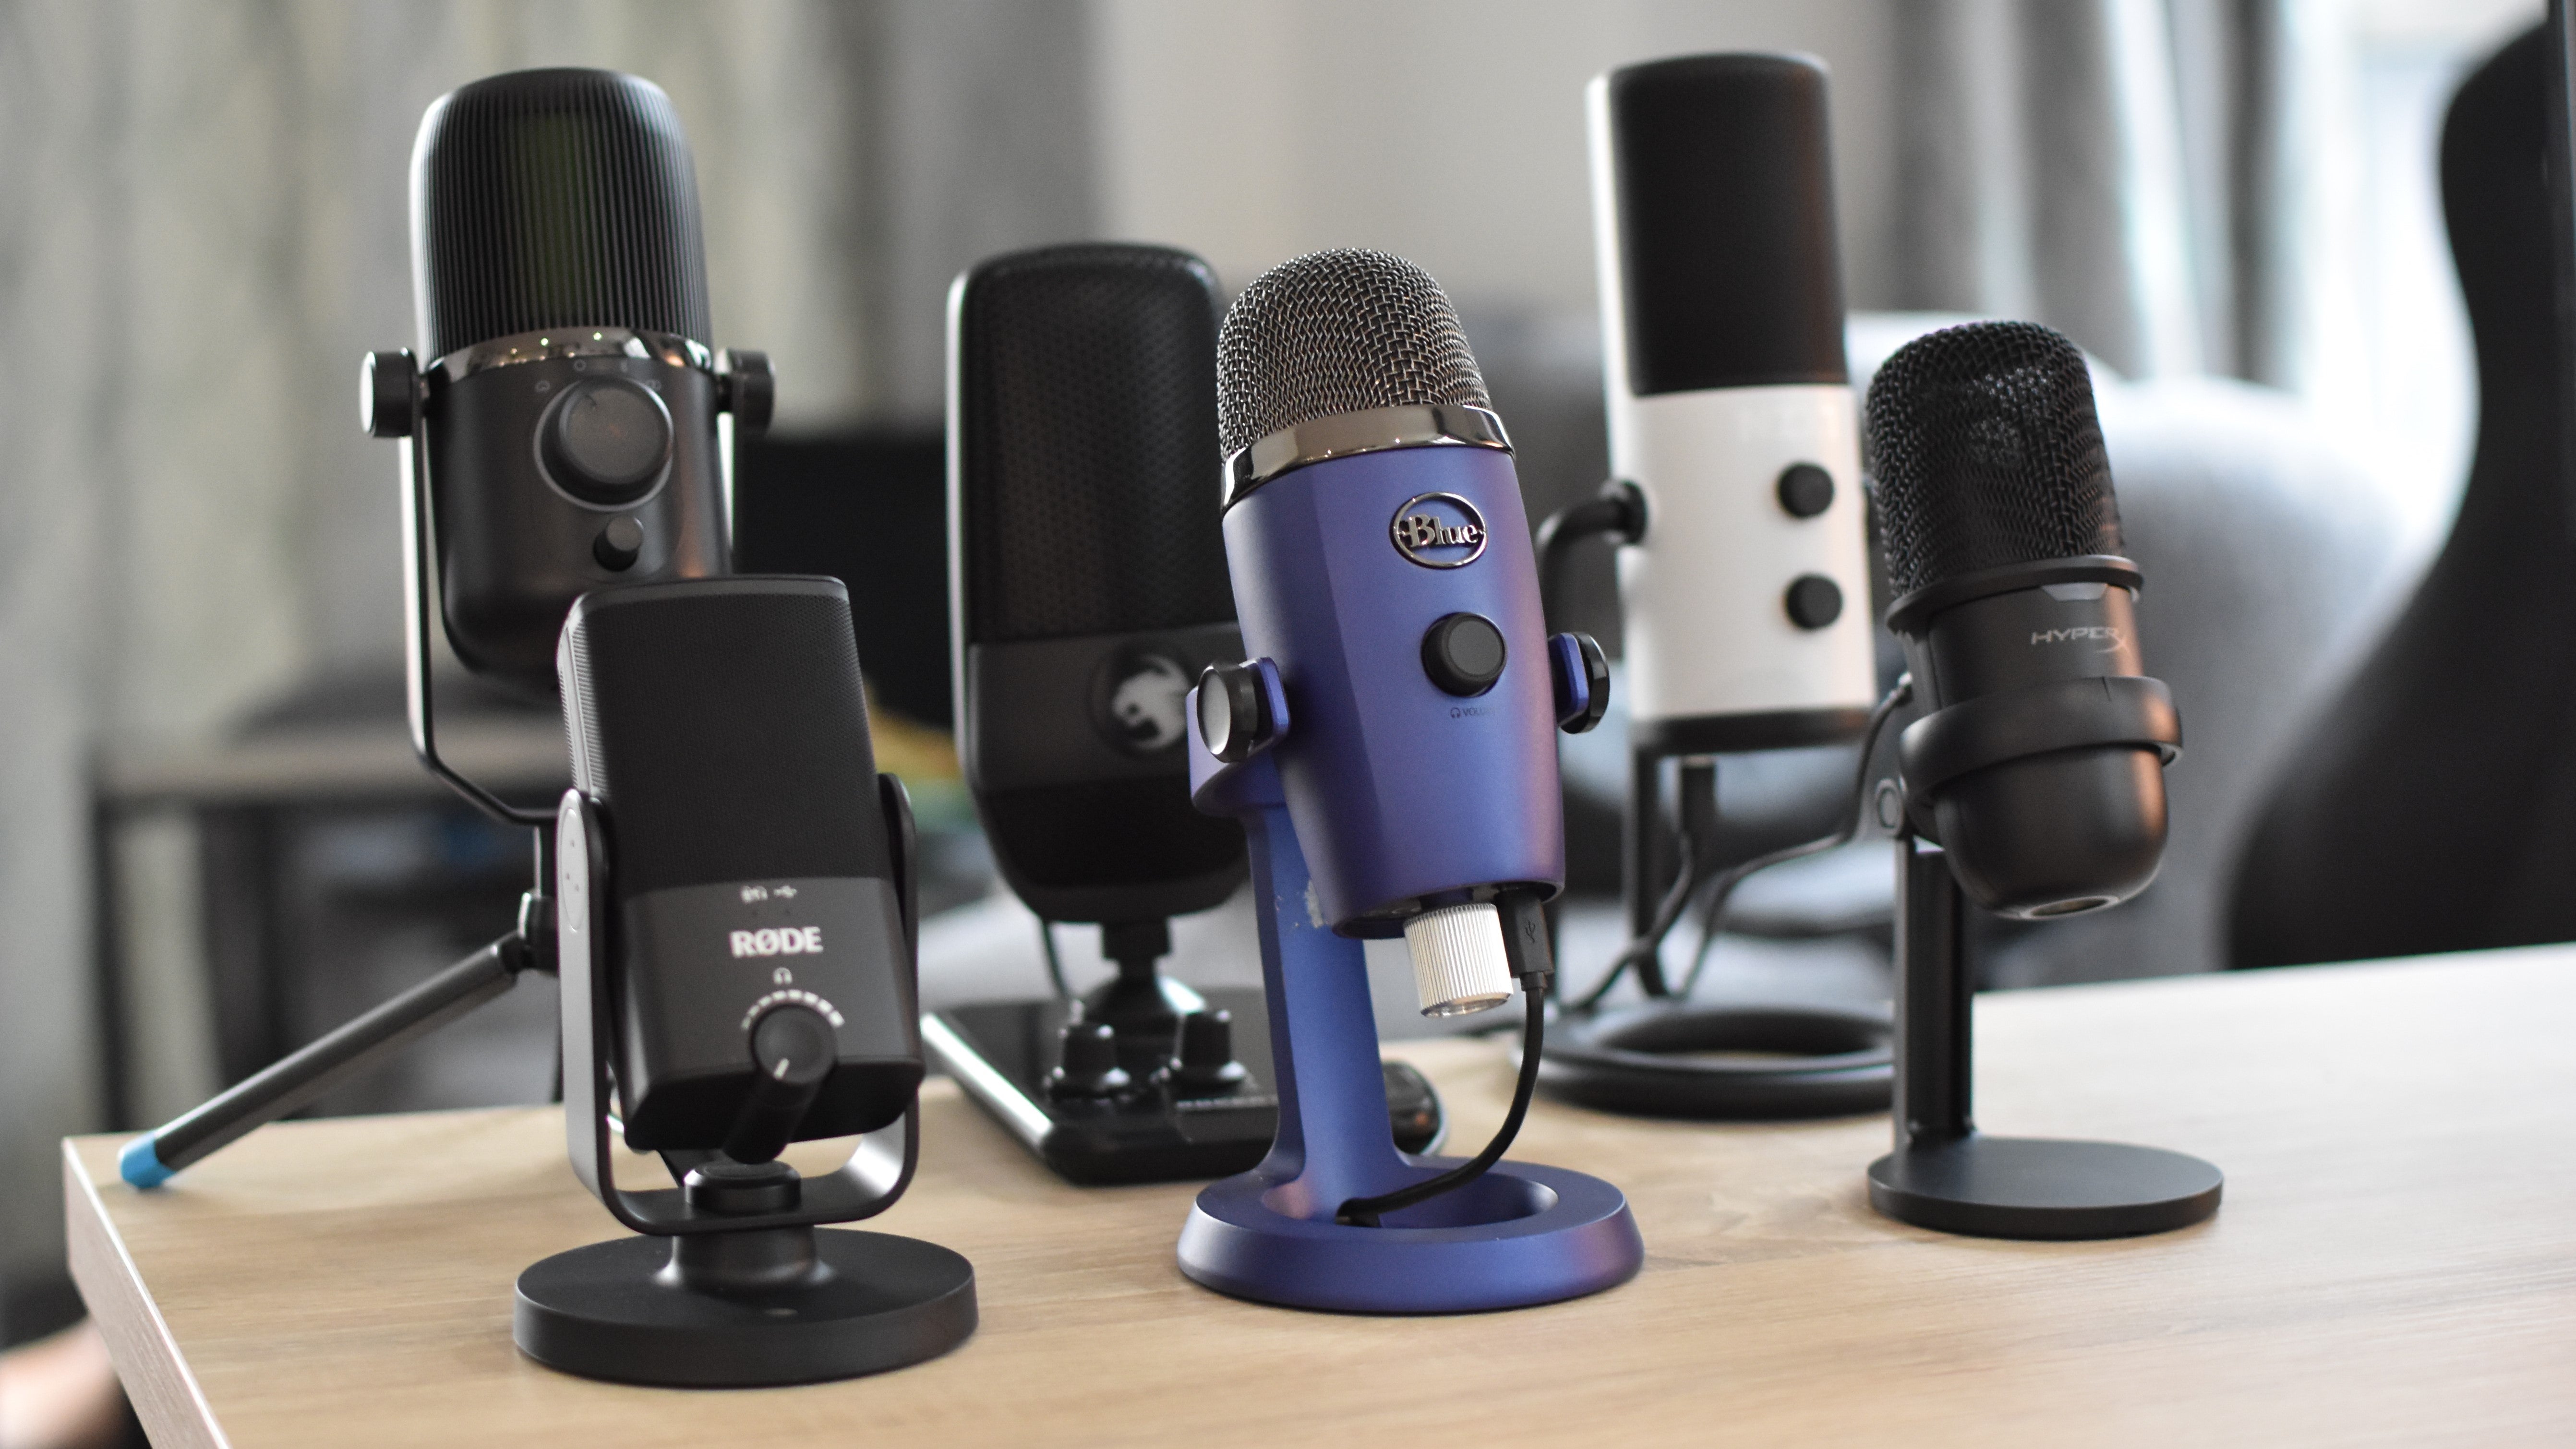 A collection of some of the best microphones for gaming, arranged on a desk.